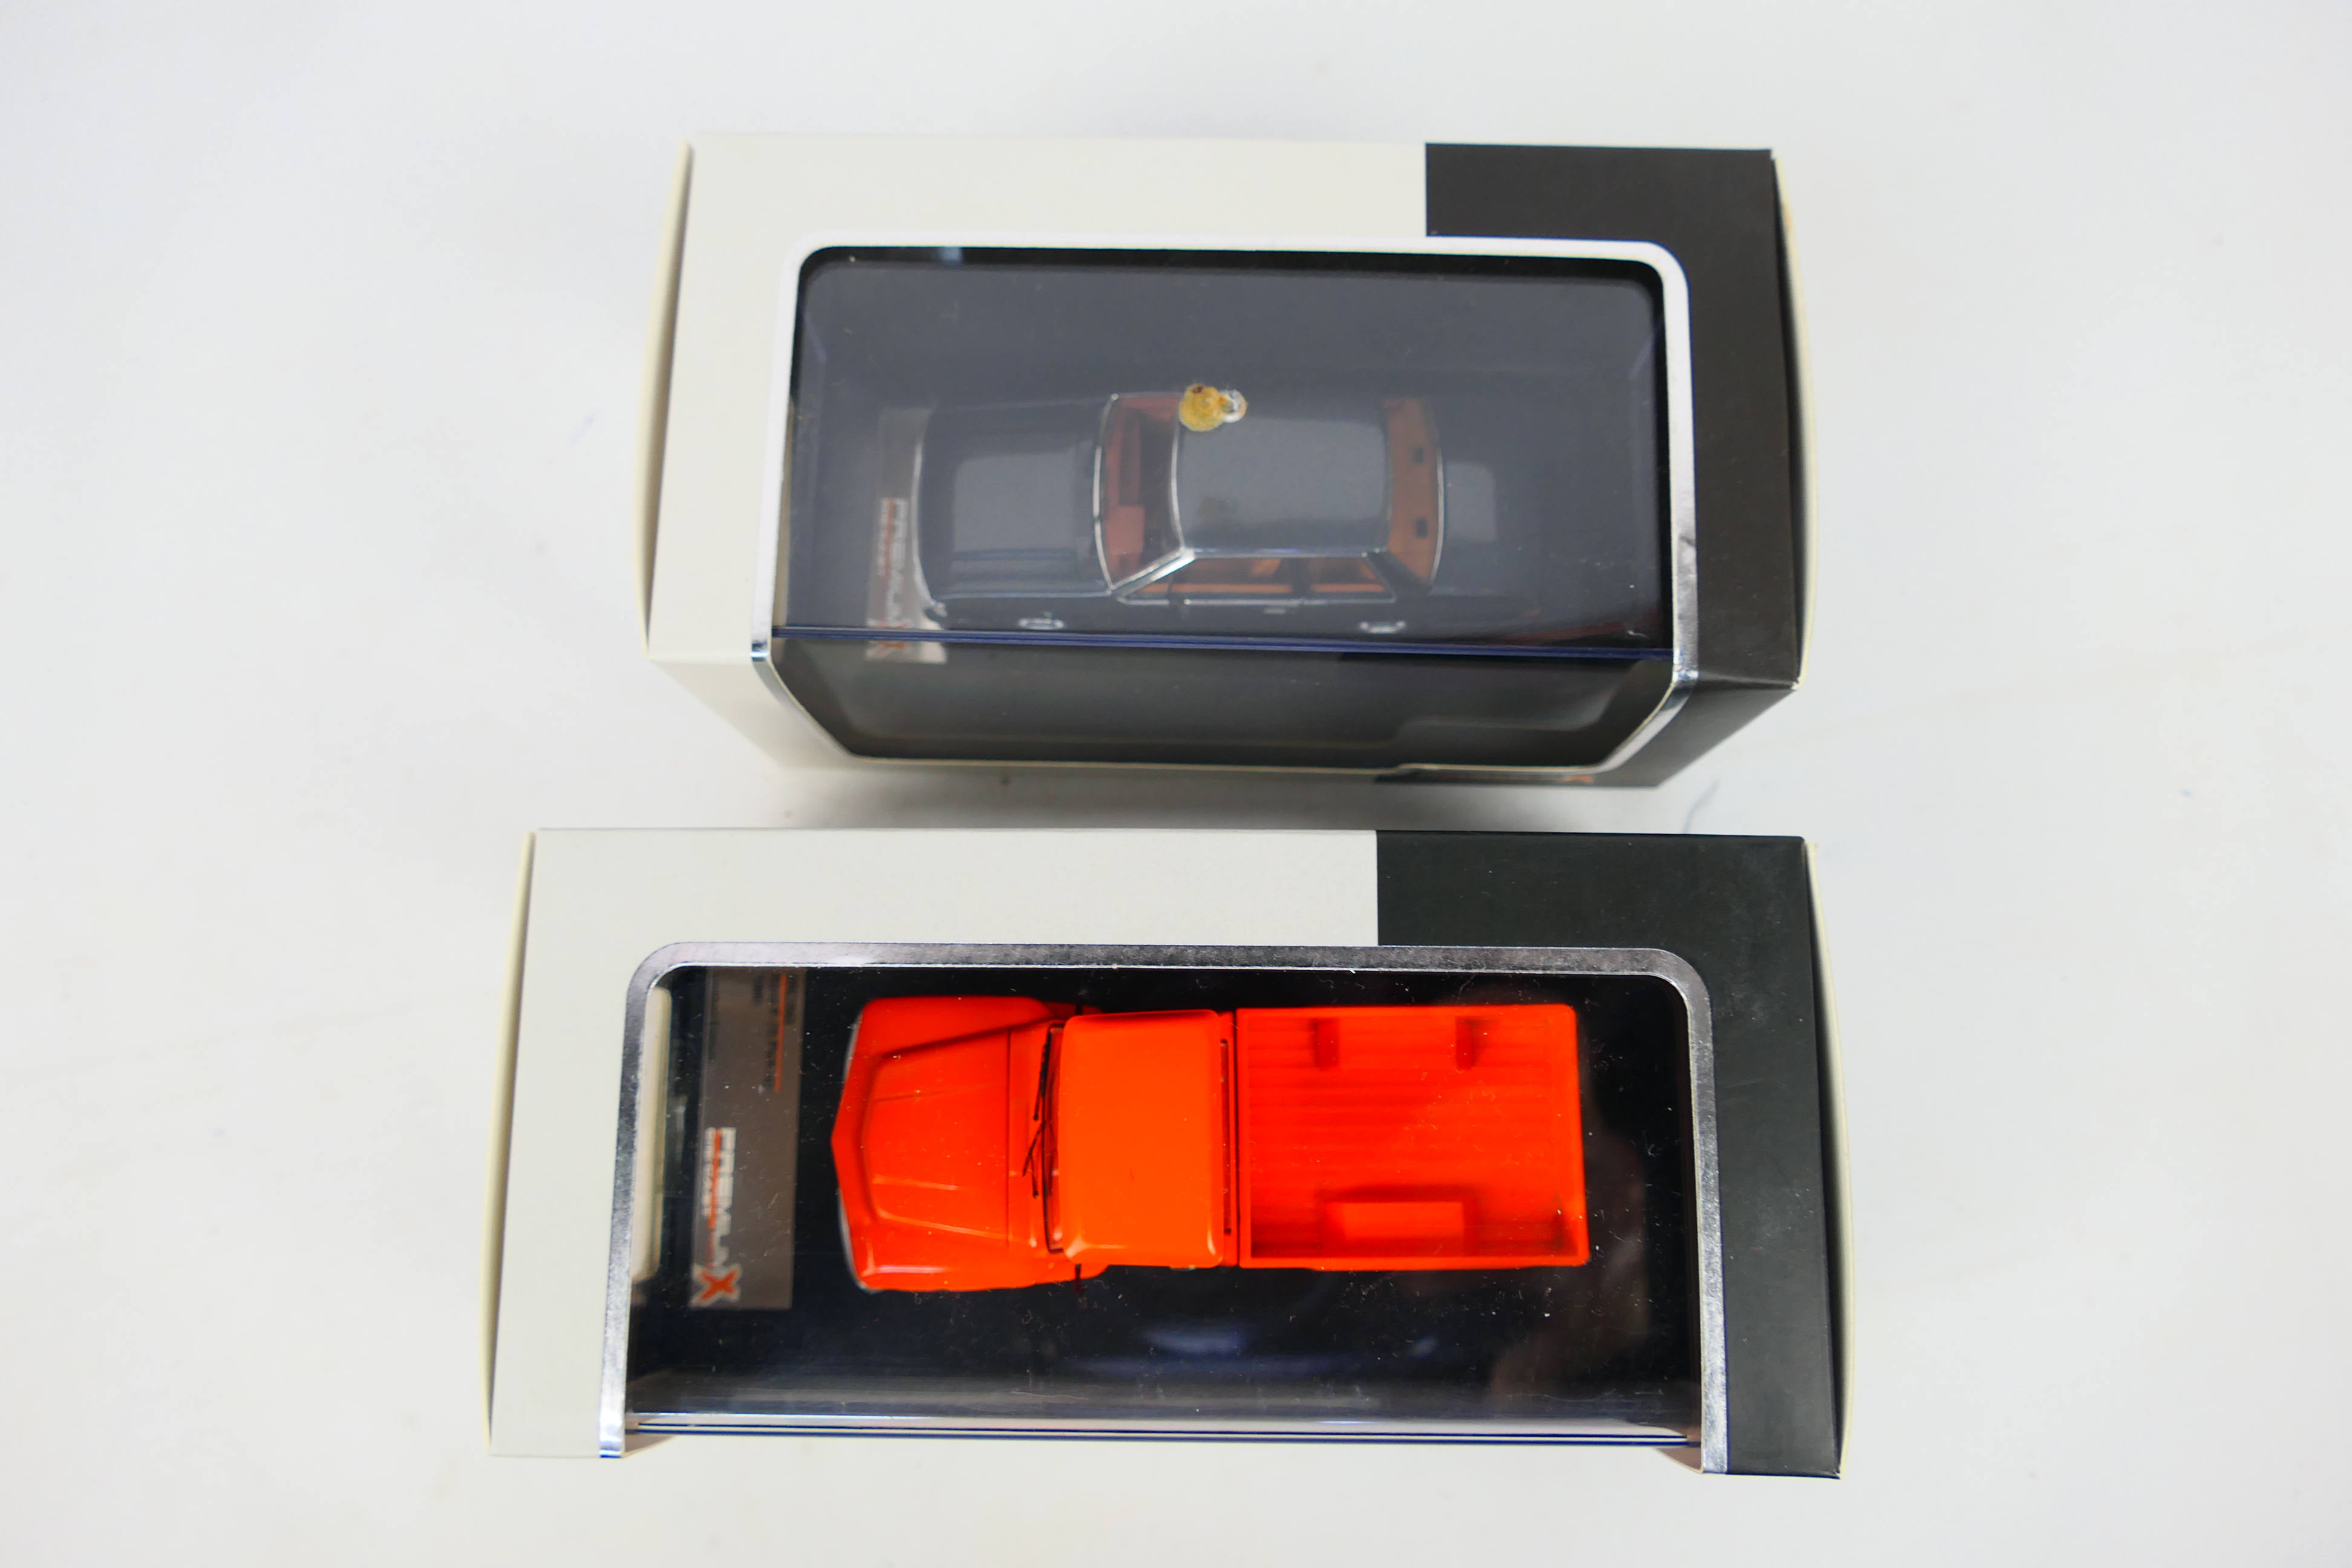 Premium X - 2 x limited edition Ford diecast models in 1:43 scale, - Image 9 of 10